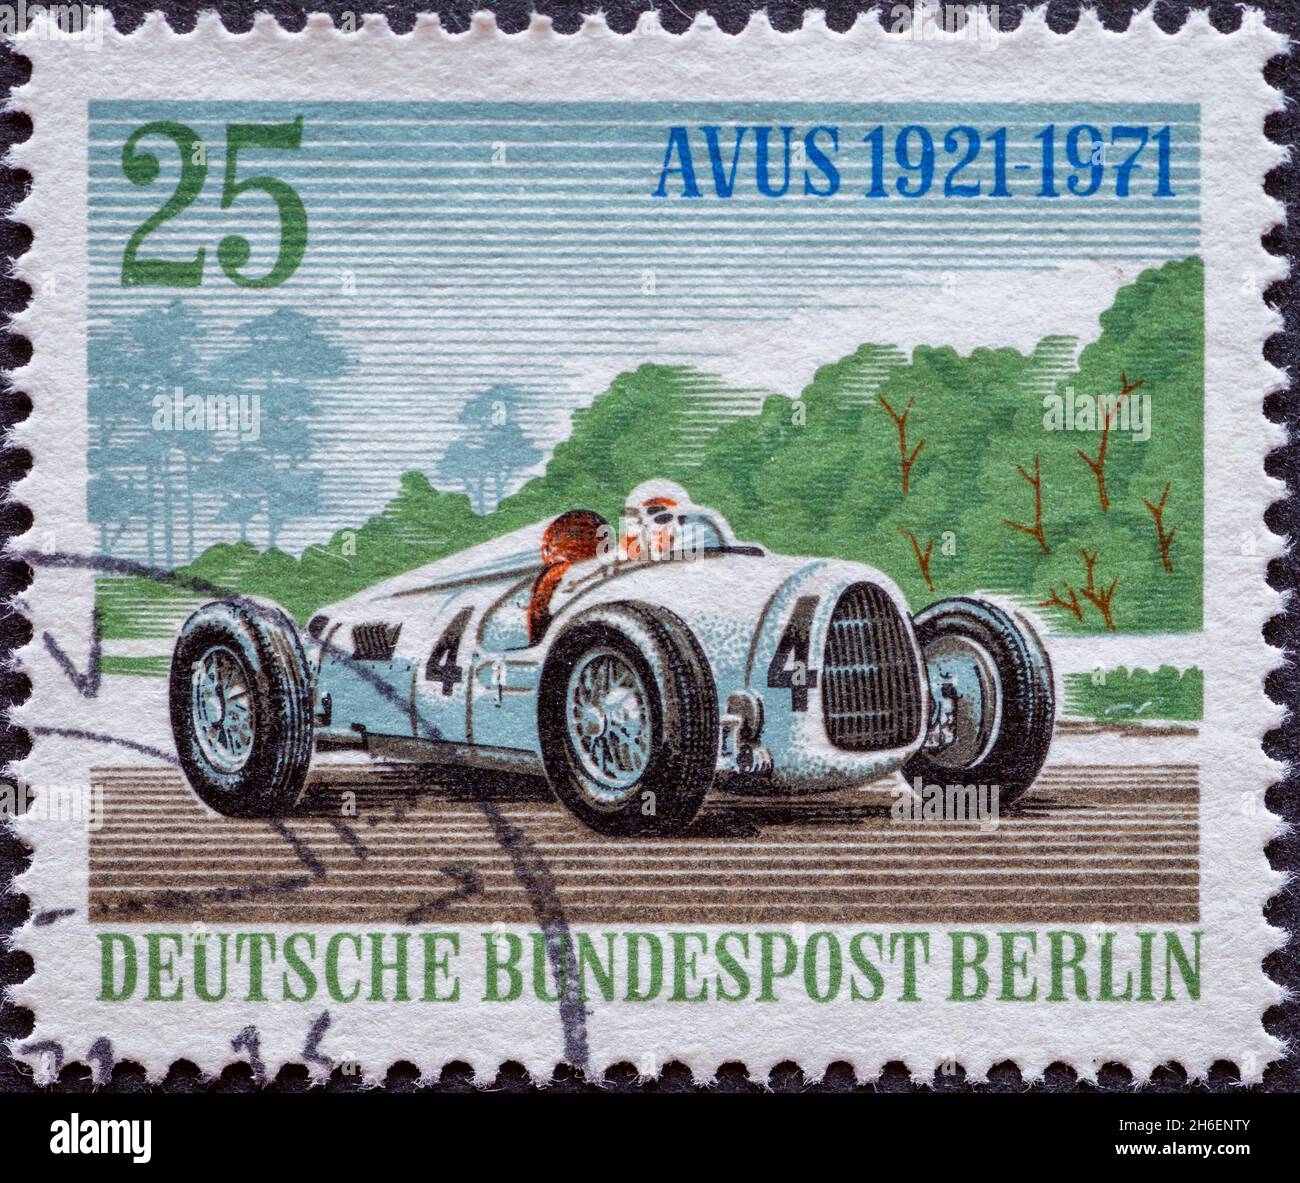 GERMANY, Berlin - CIRCA 1971 a postage stamp from Germany, Berlin showing Racing car for the 50th anniversary of the Avus race: Auto Union racer Stock Photo